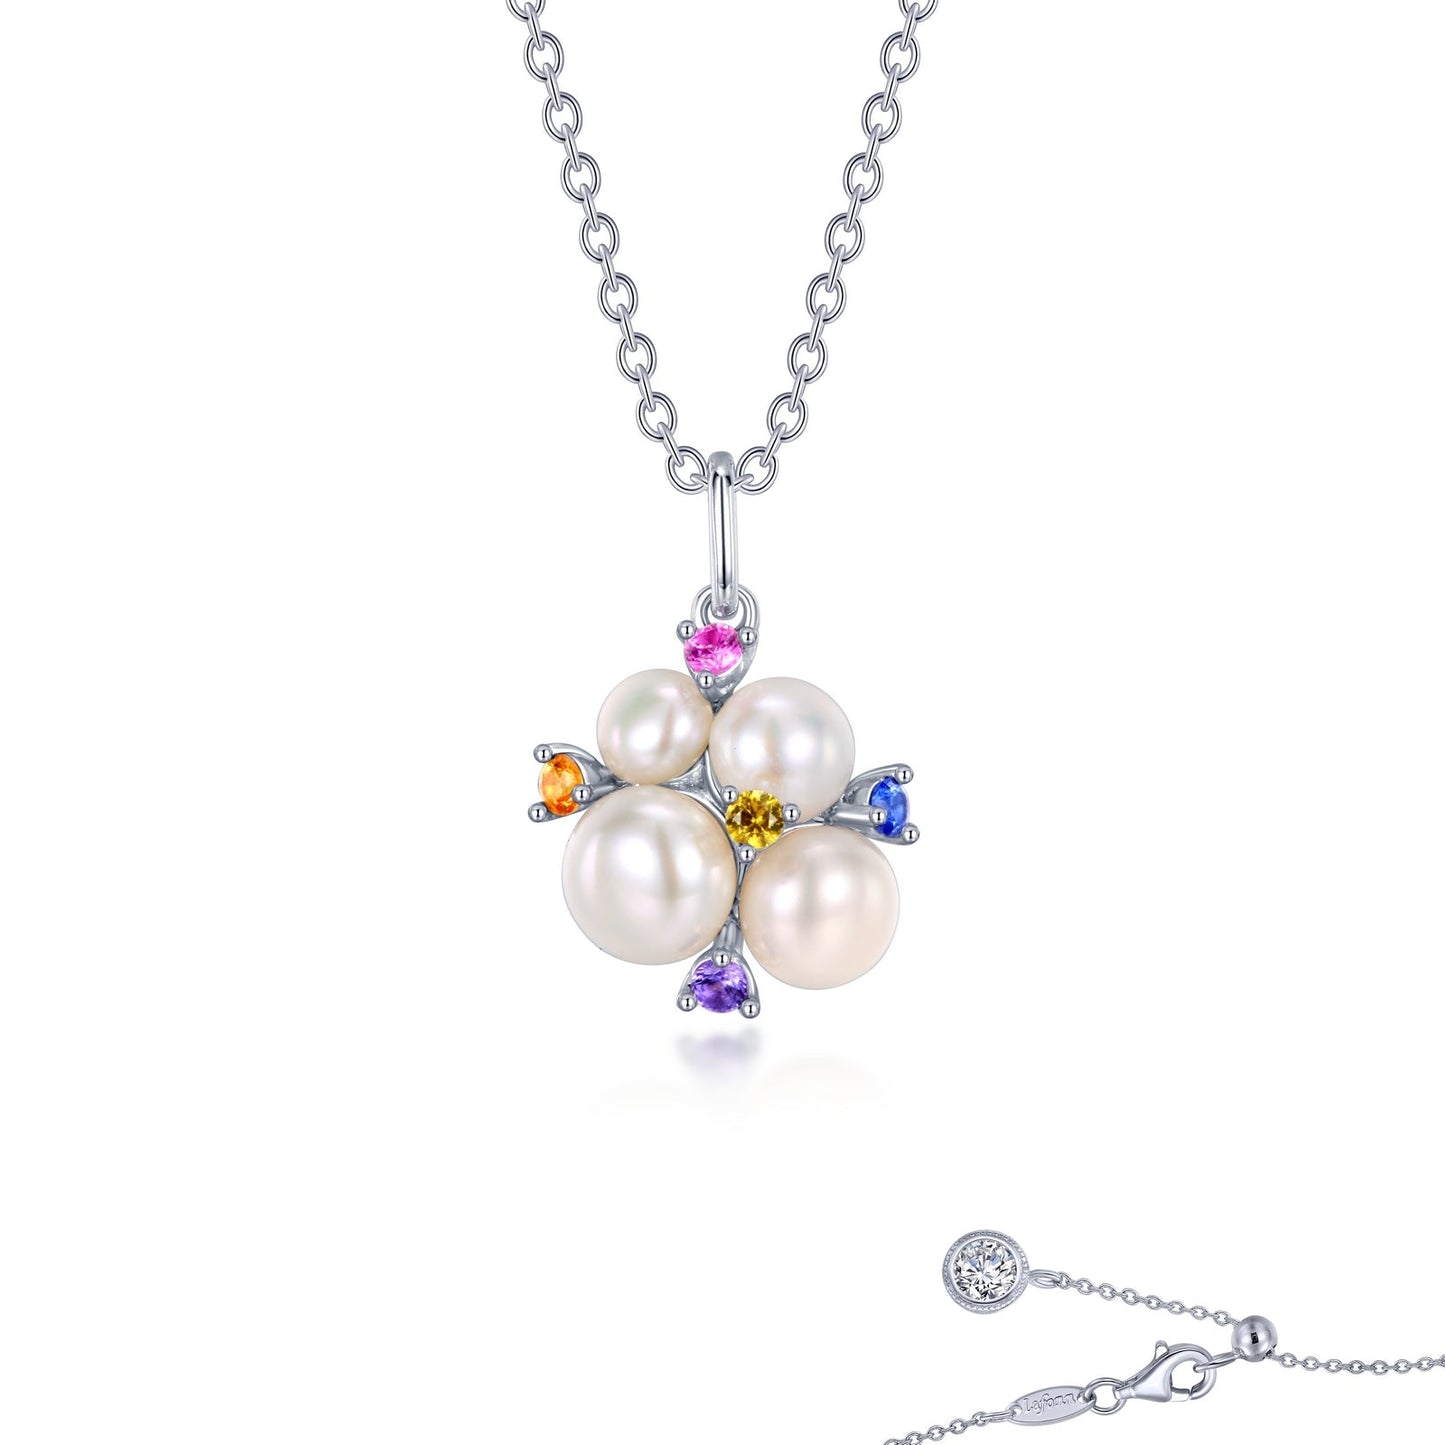 Lafonn Freshwater Pearl and Lab Grown Sapphires Necklace RUBY CORUNDUM NECKLACES Platinum  CTS Approx. 10.0mm (H) x 10.0mm (W)